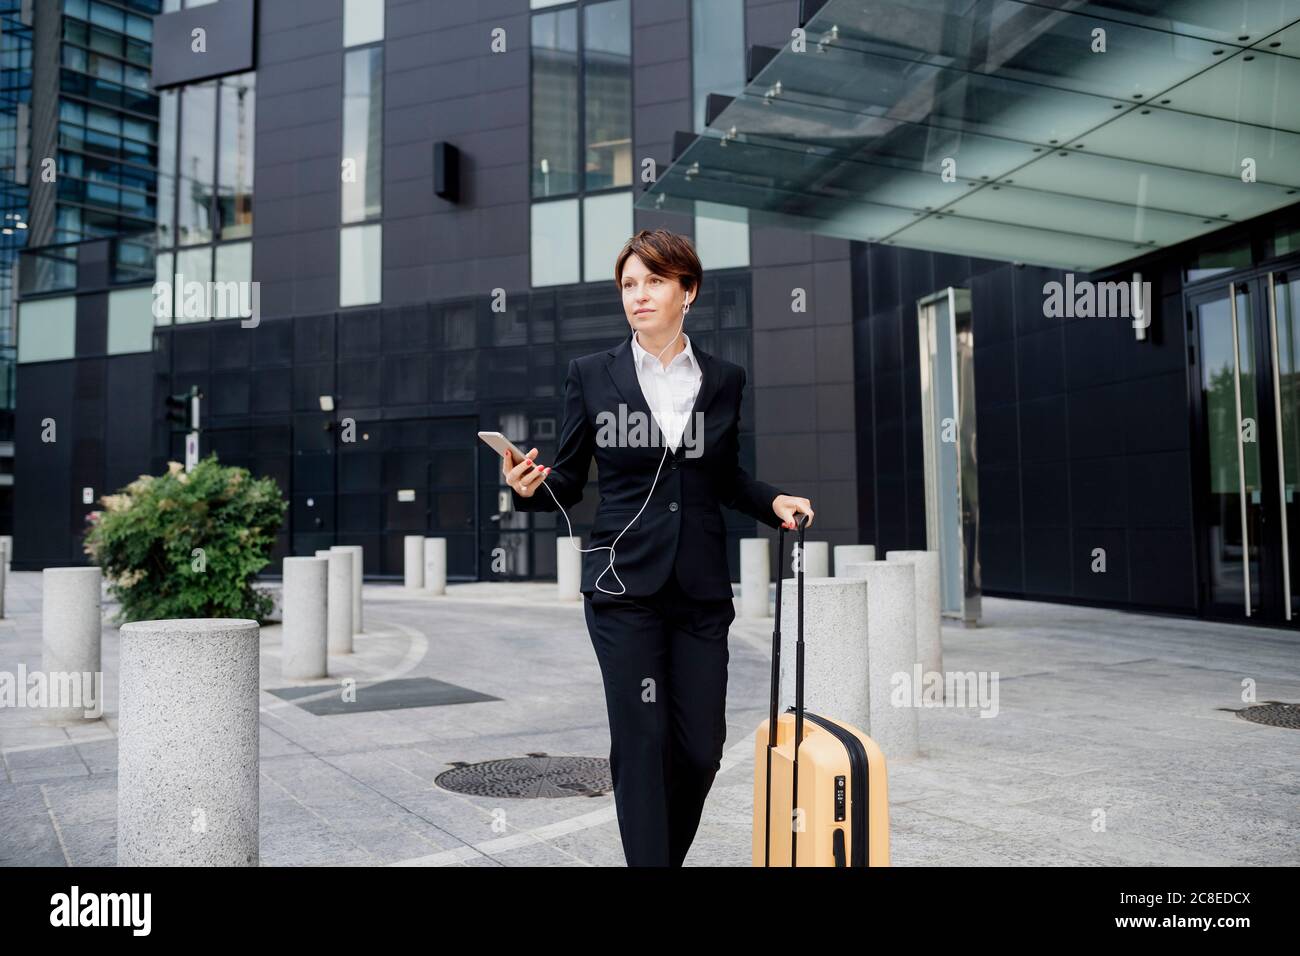 Female professional listening music while walking with suitcase against modern building Stock Photo